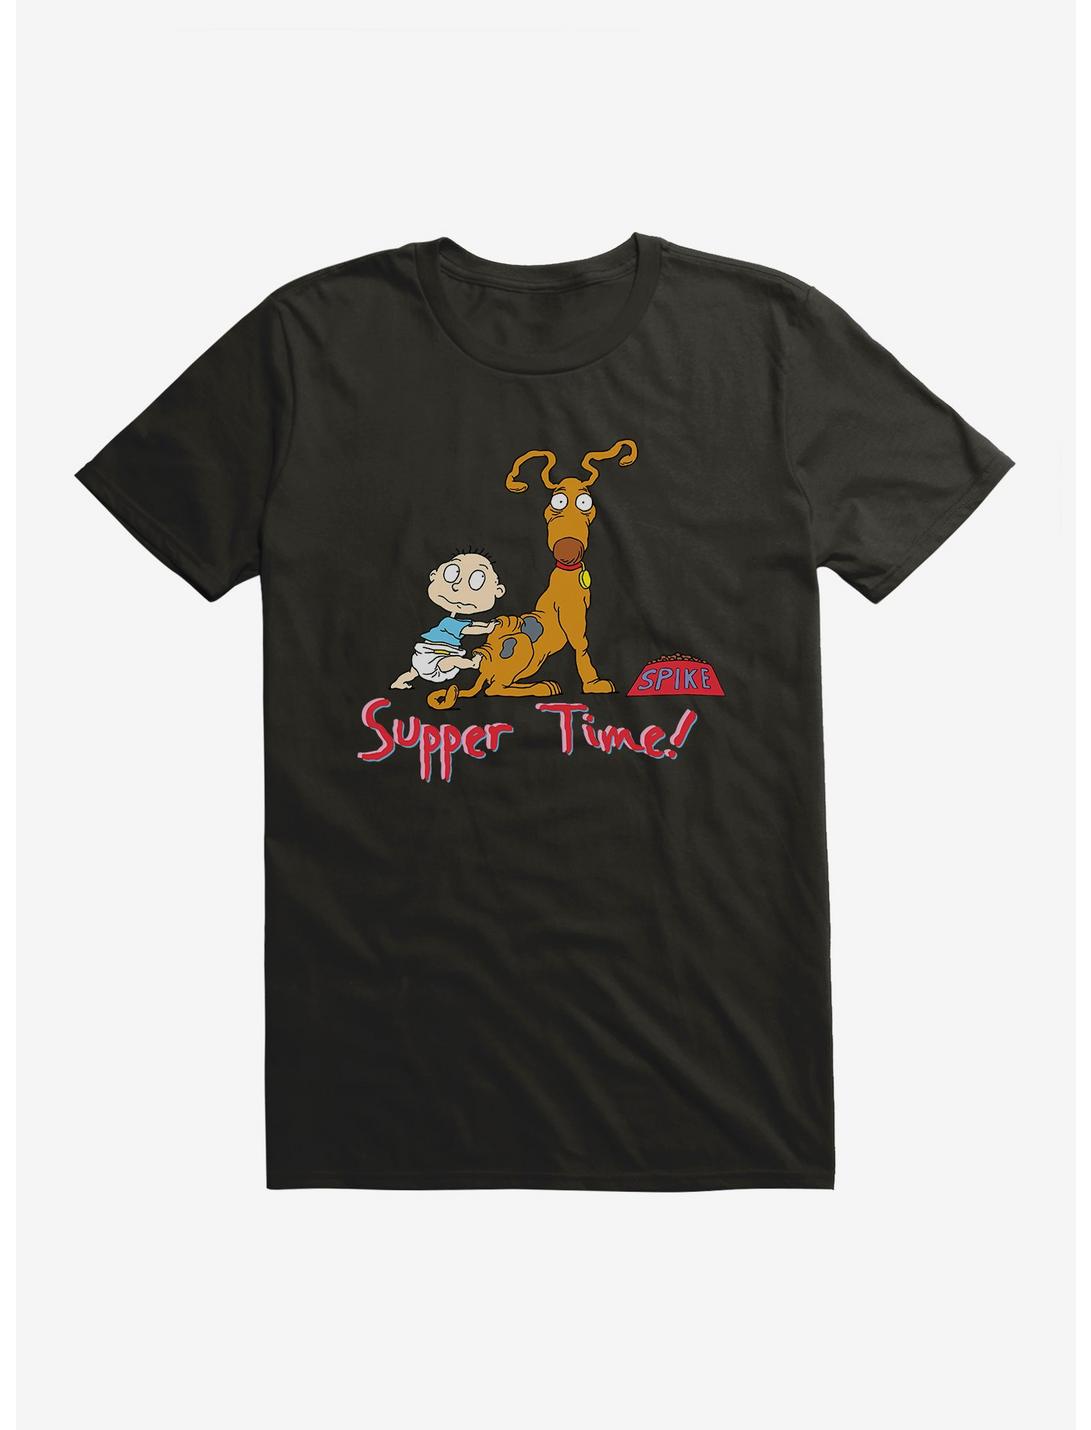 Rugrats Spike And Tommy Supper Time! T-Shirt, BLACK, hi-res